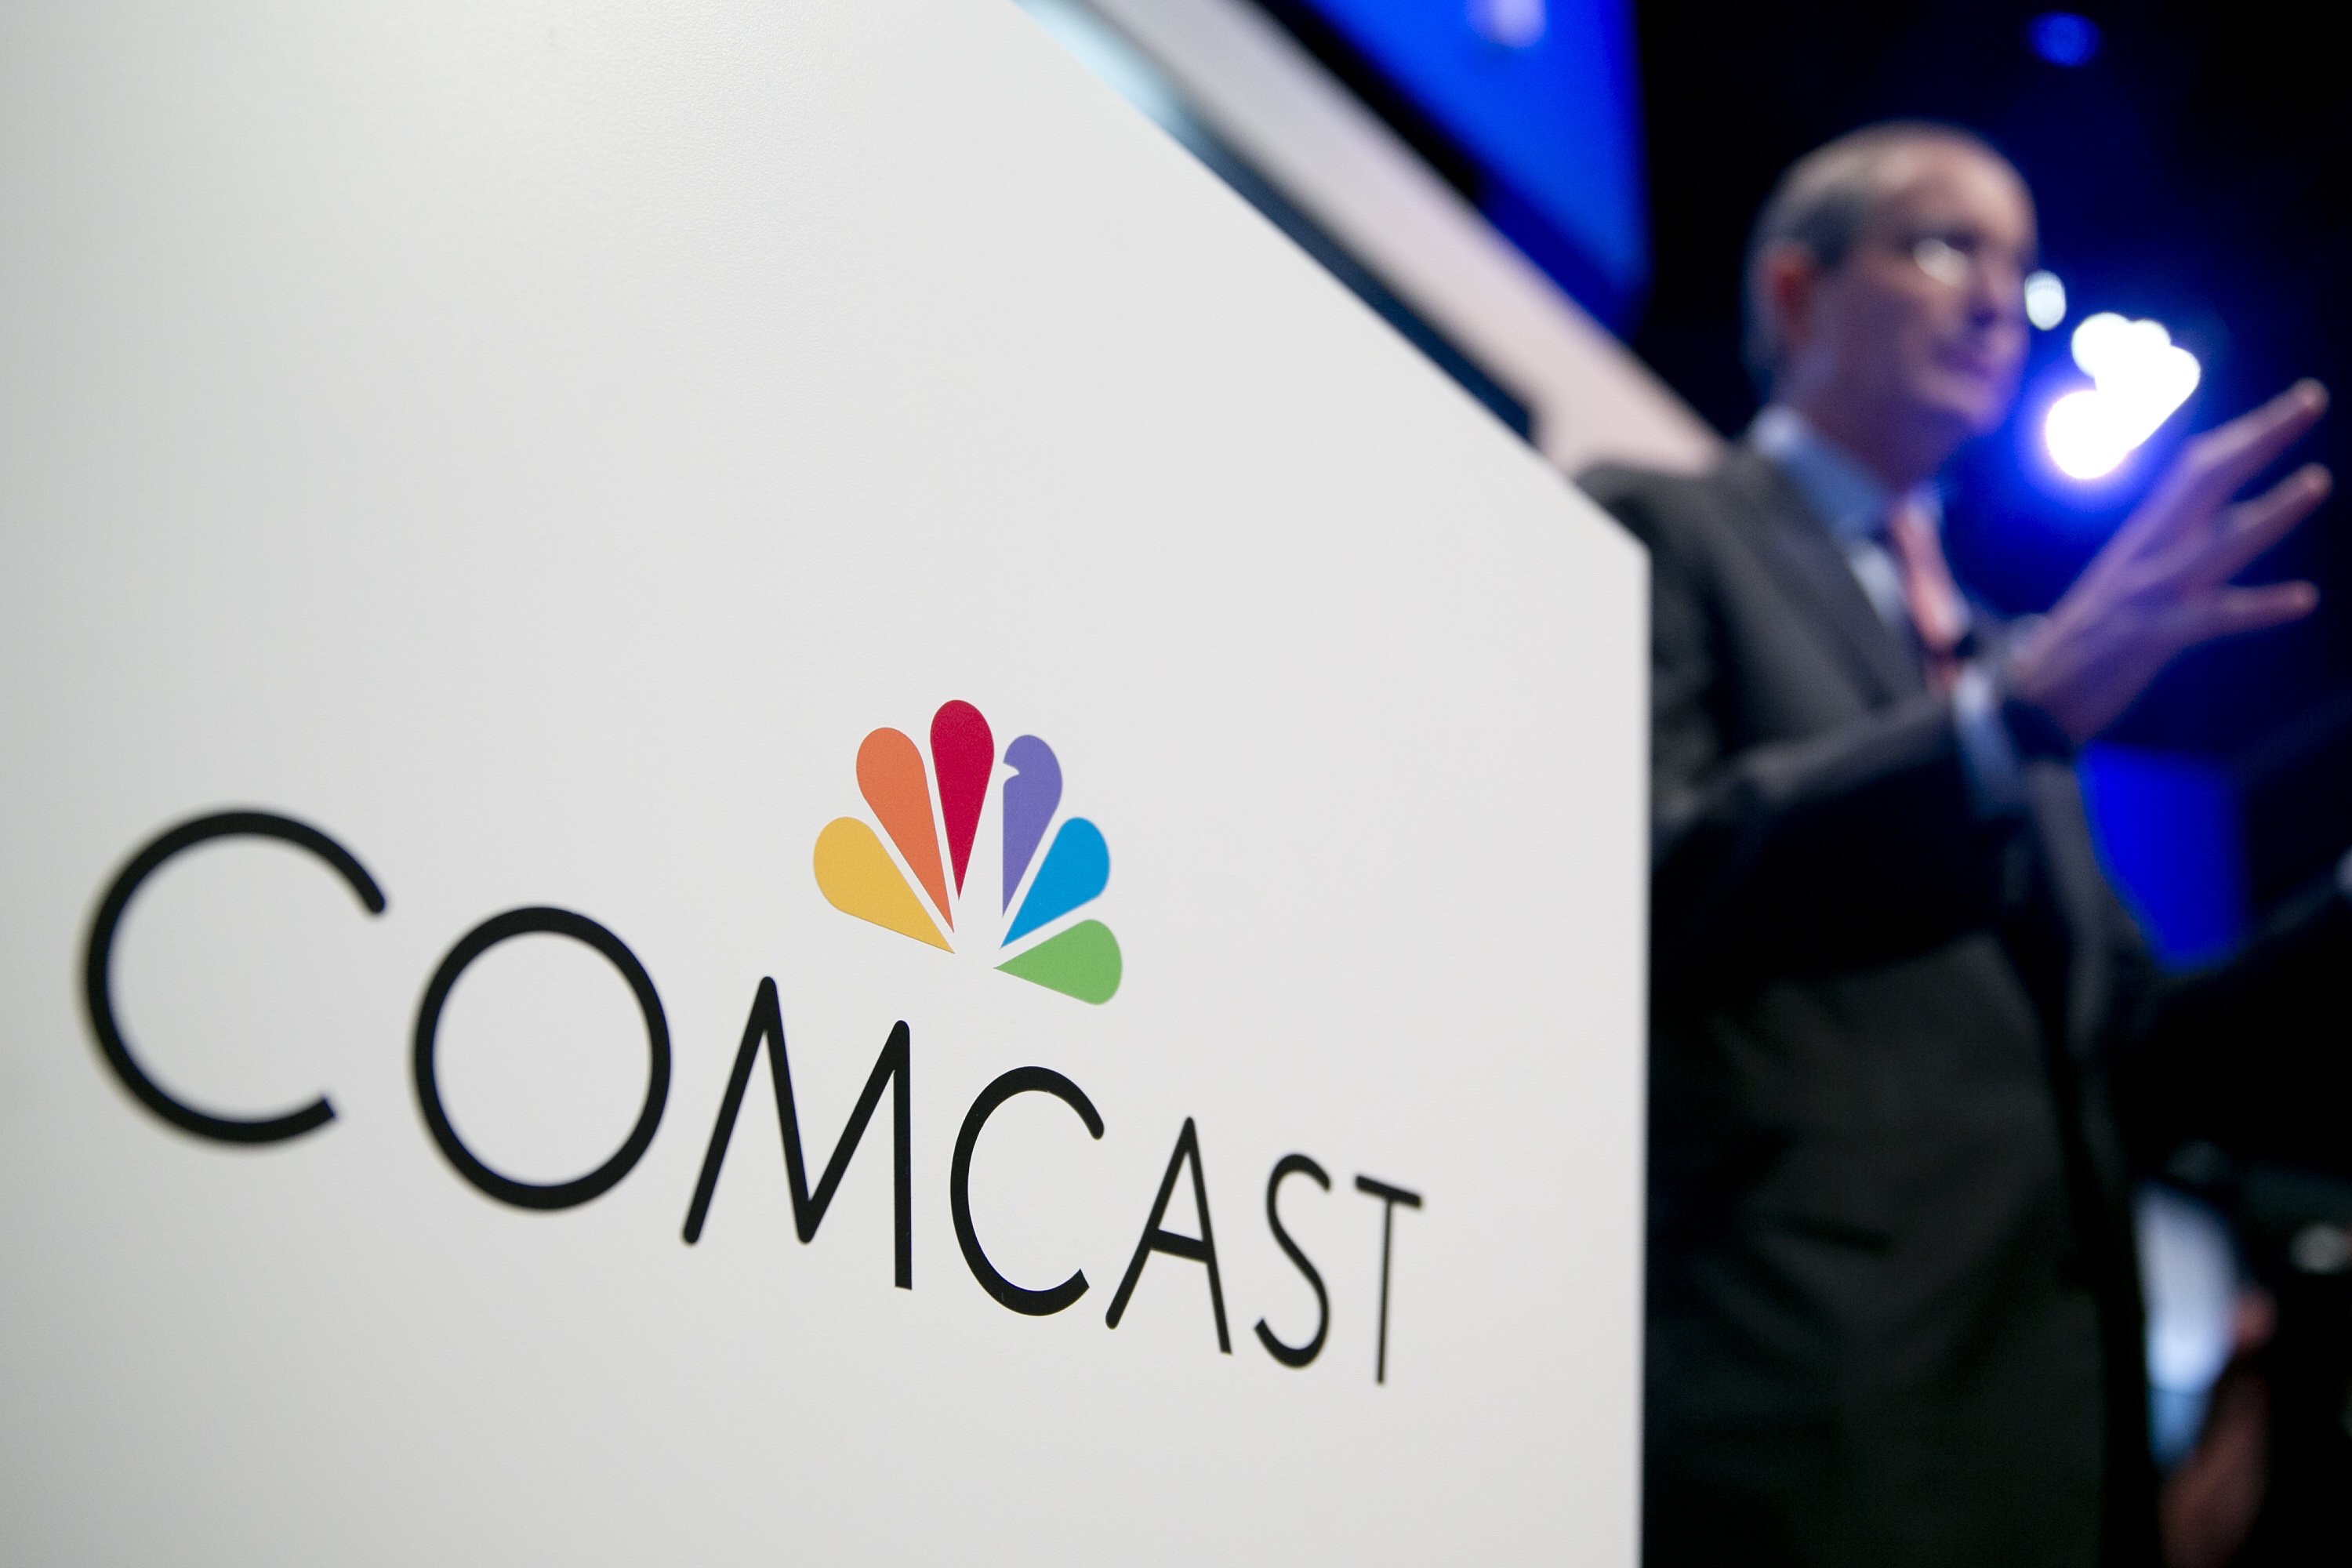 Comcast fires 500 employees even though it claimed tax cuts would help create thousands of jobs